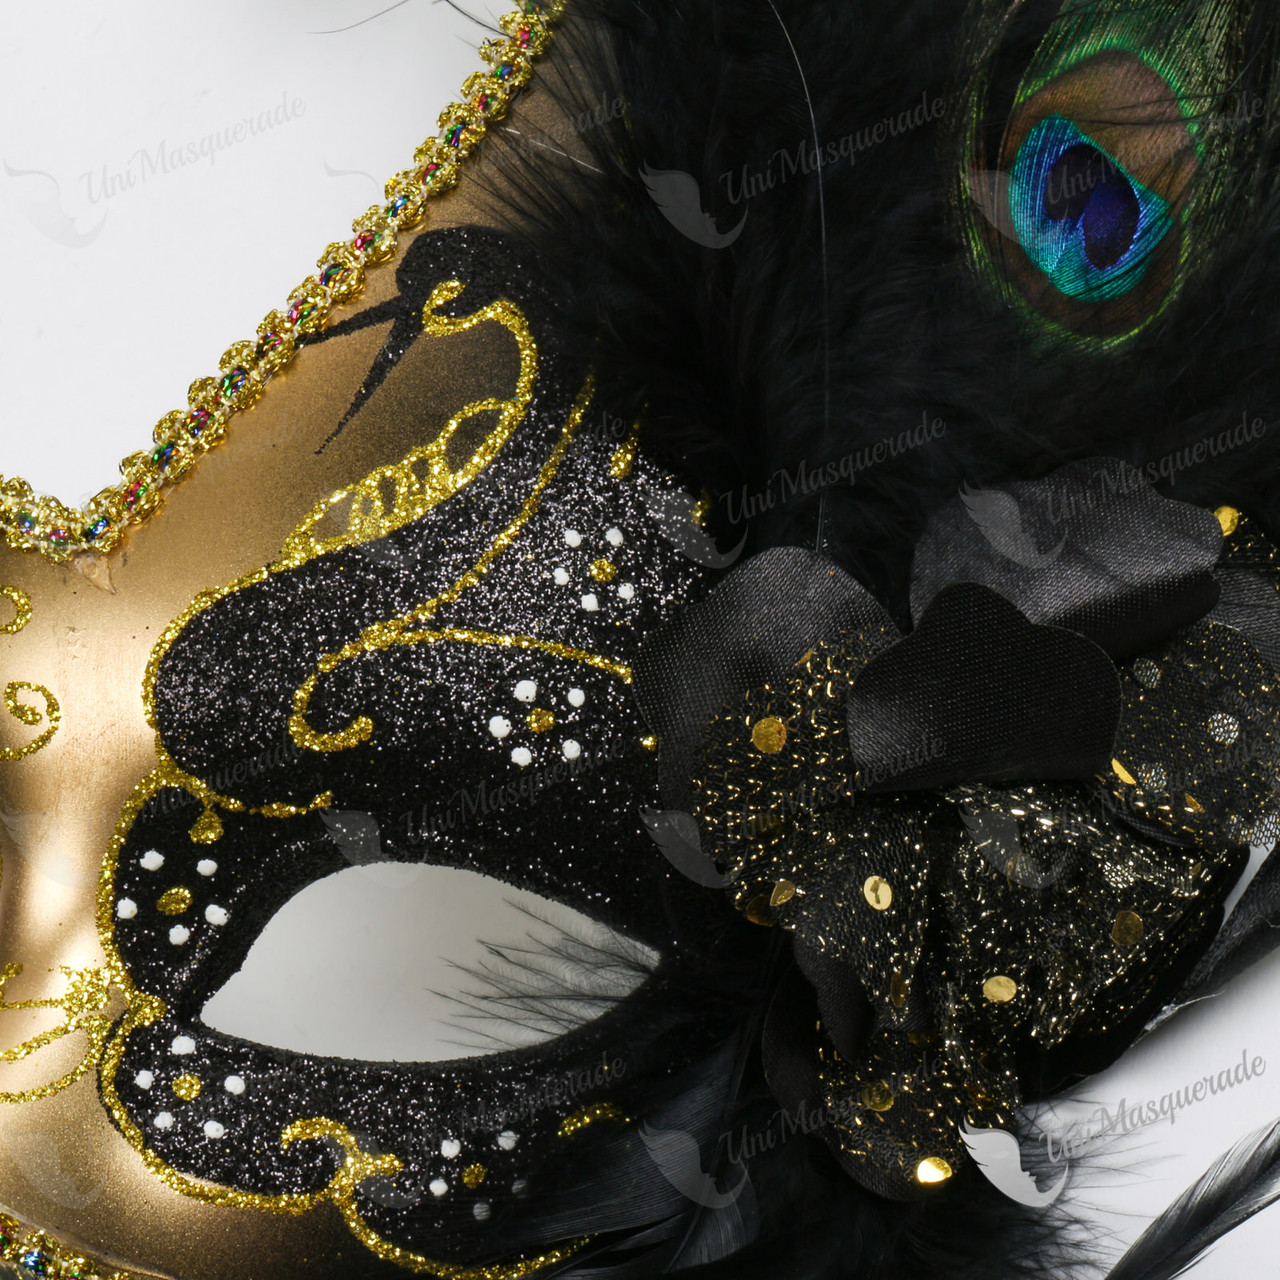 Swan Colombina Black Side Feather Gold Masquerade Mask